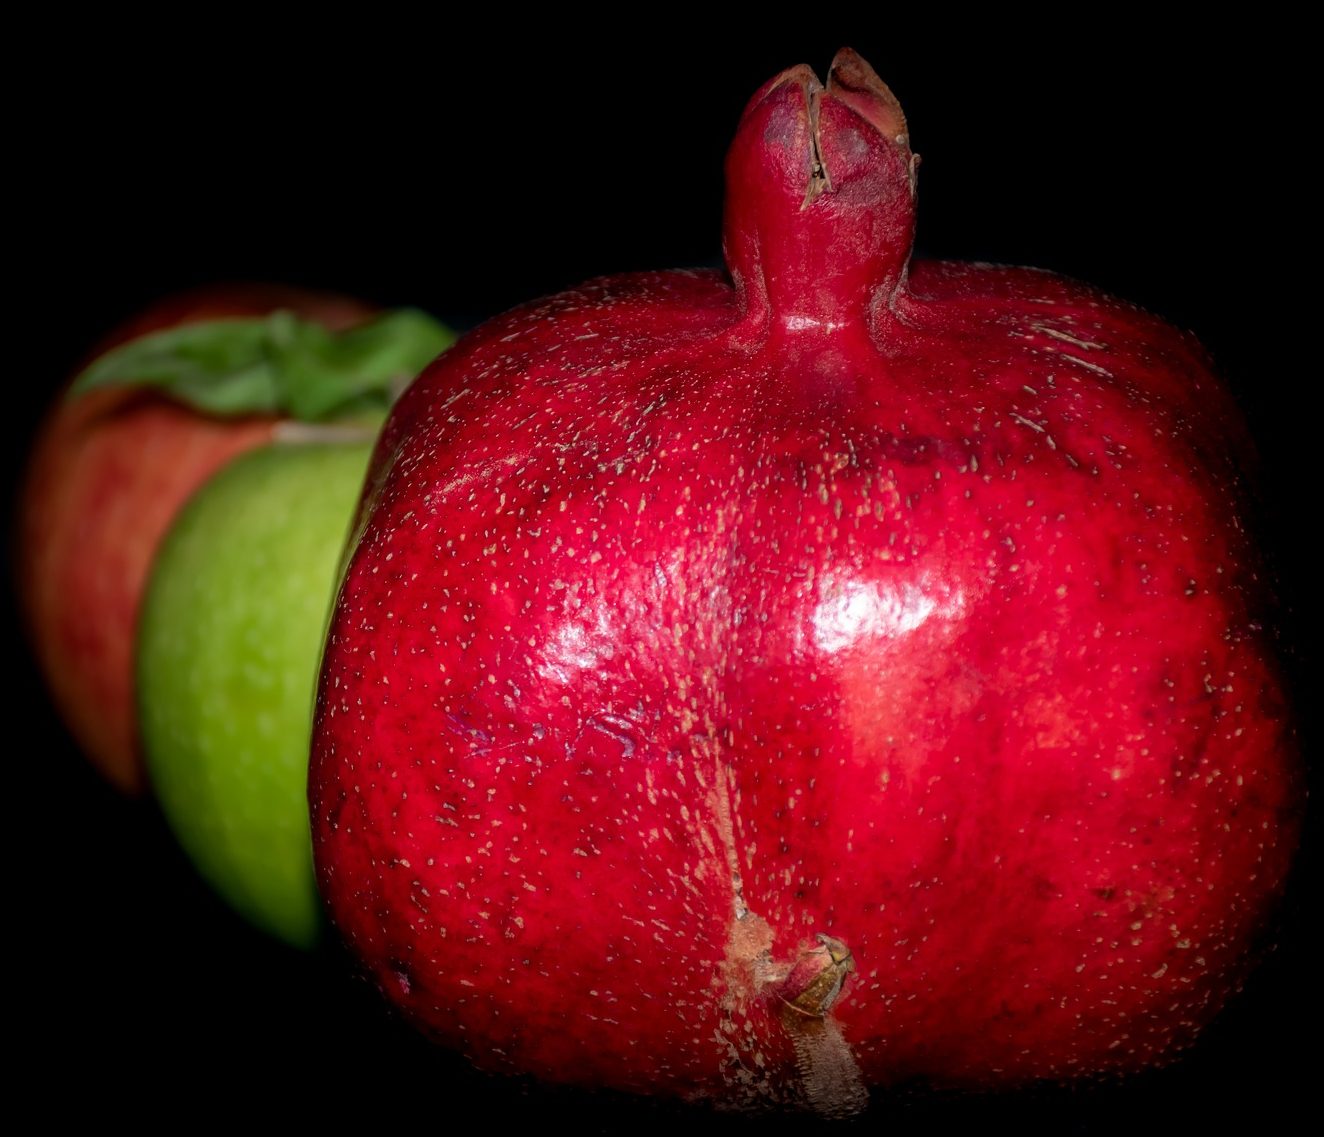 Image of Pomegranite and two apples.